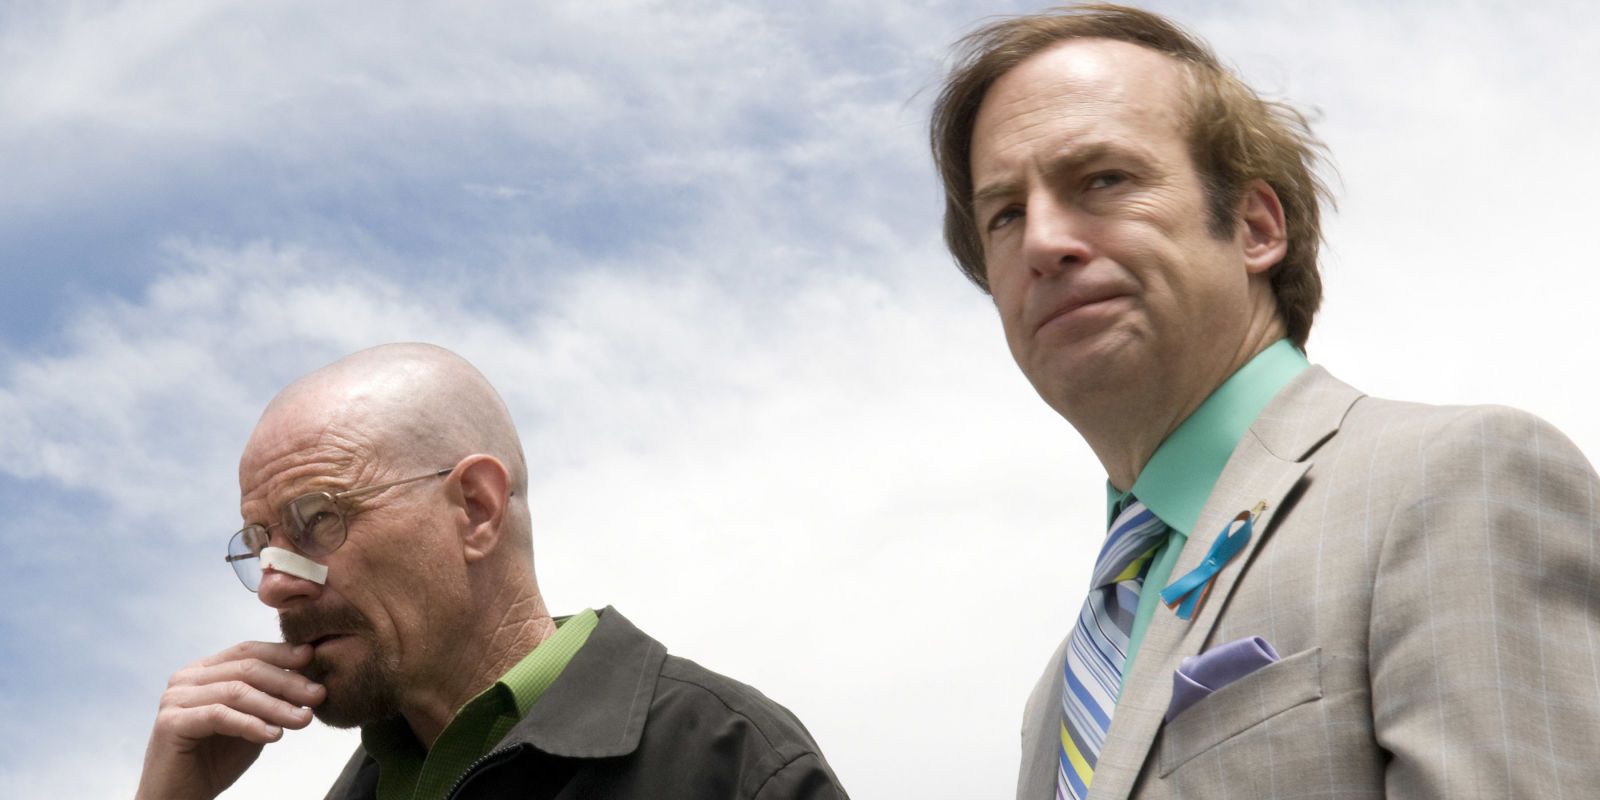 Saul Goodman and Walter White discuss money laundering ideas in Breaking Bad